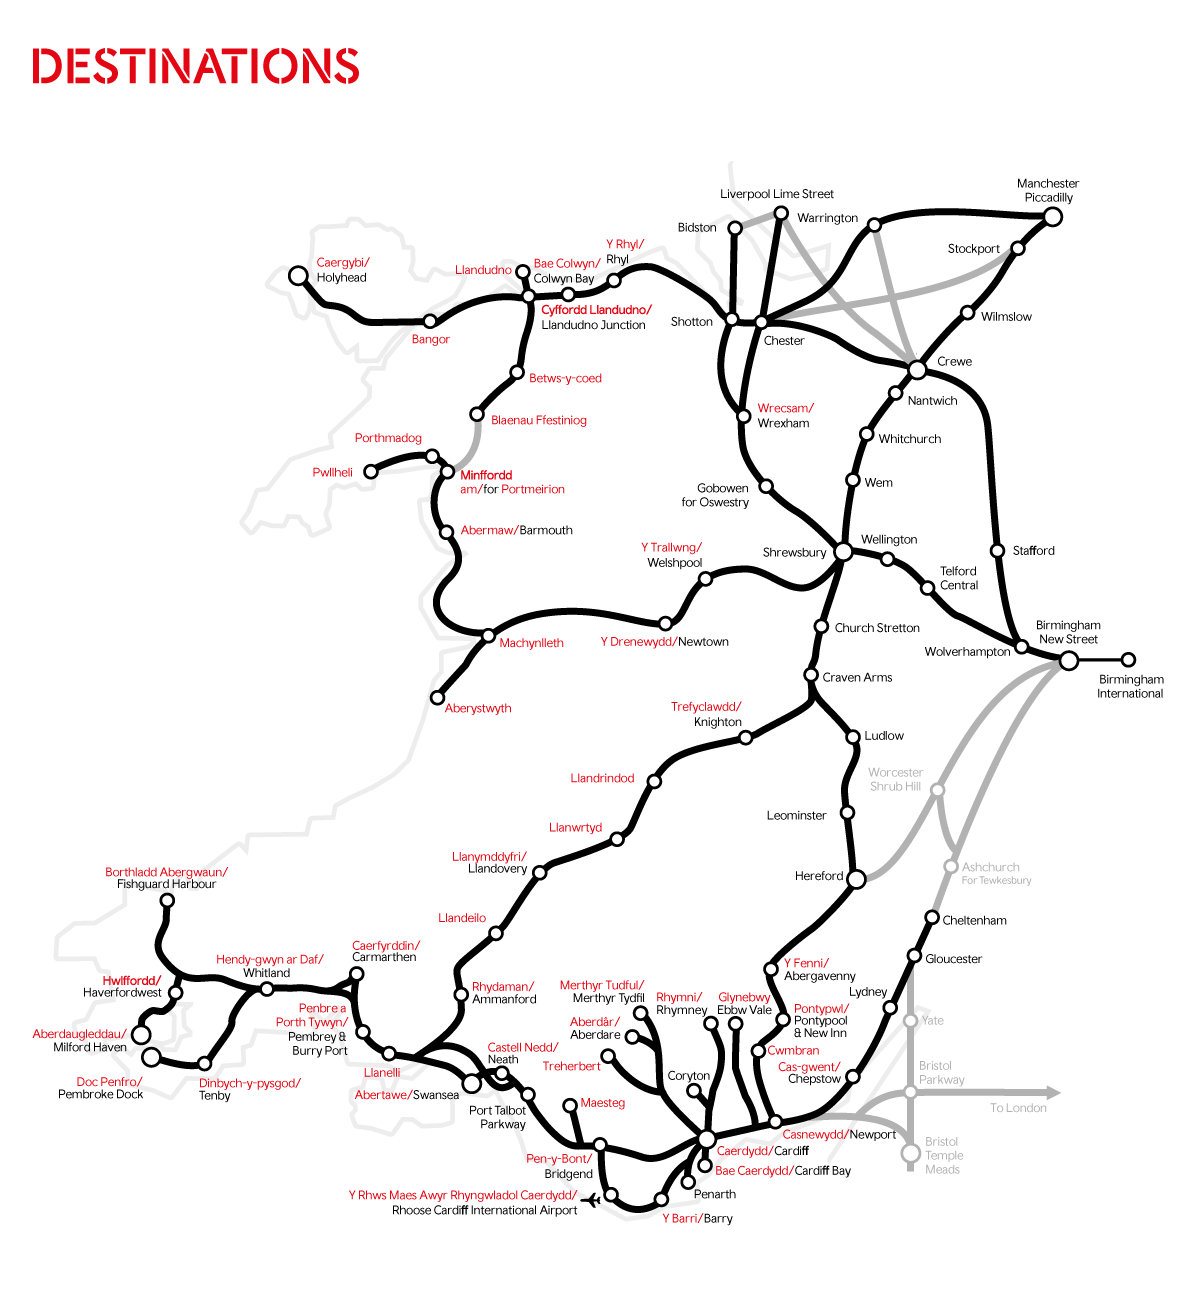 Transport for Wales Club 50 Destinations Map